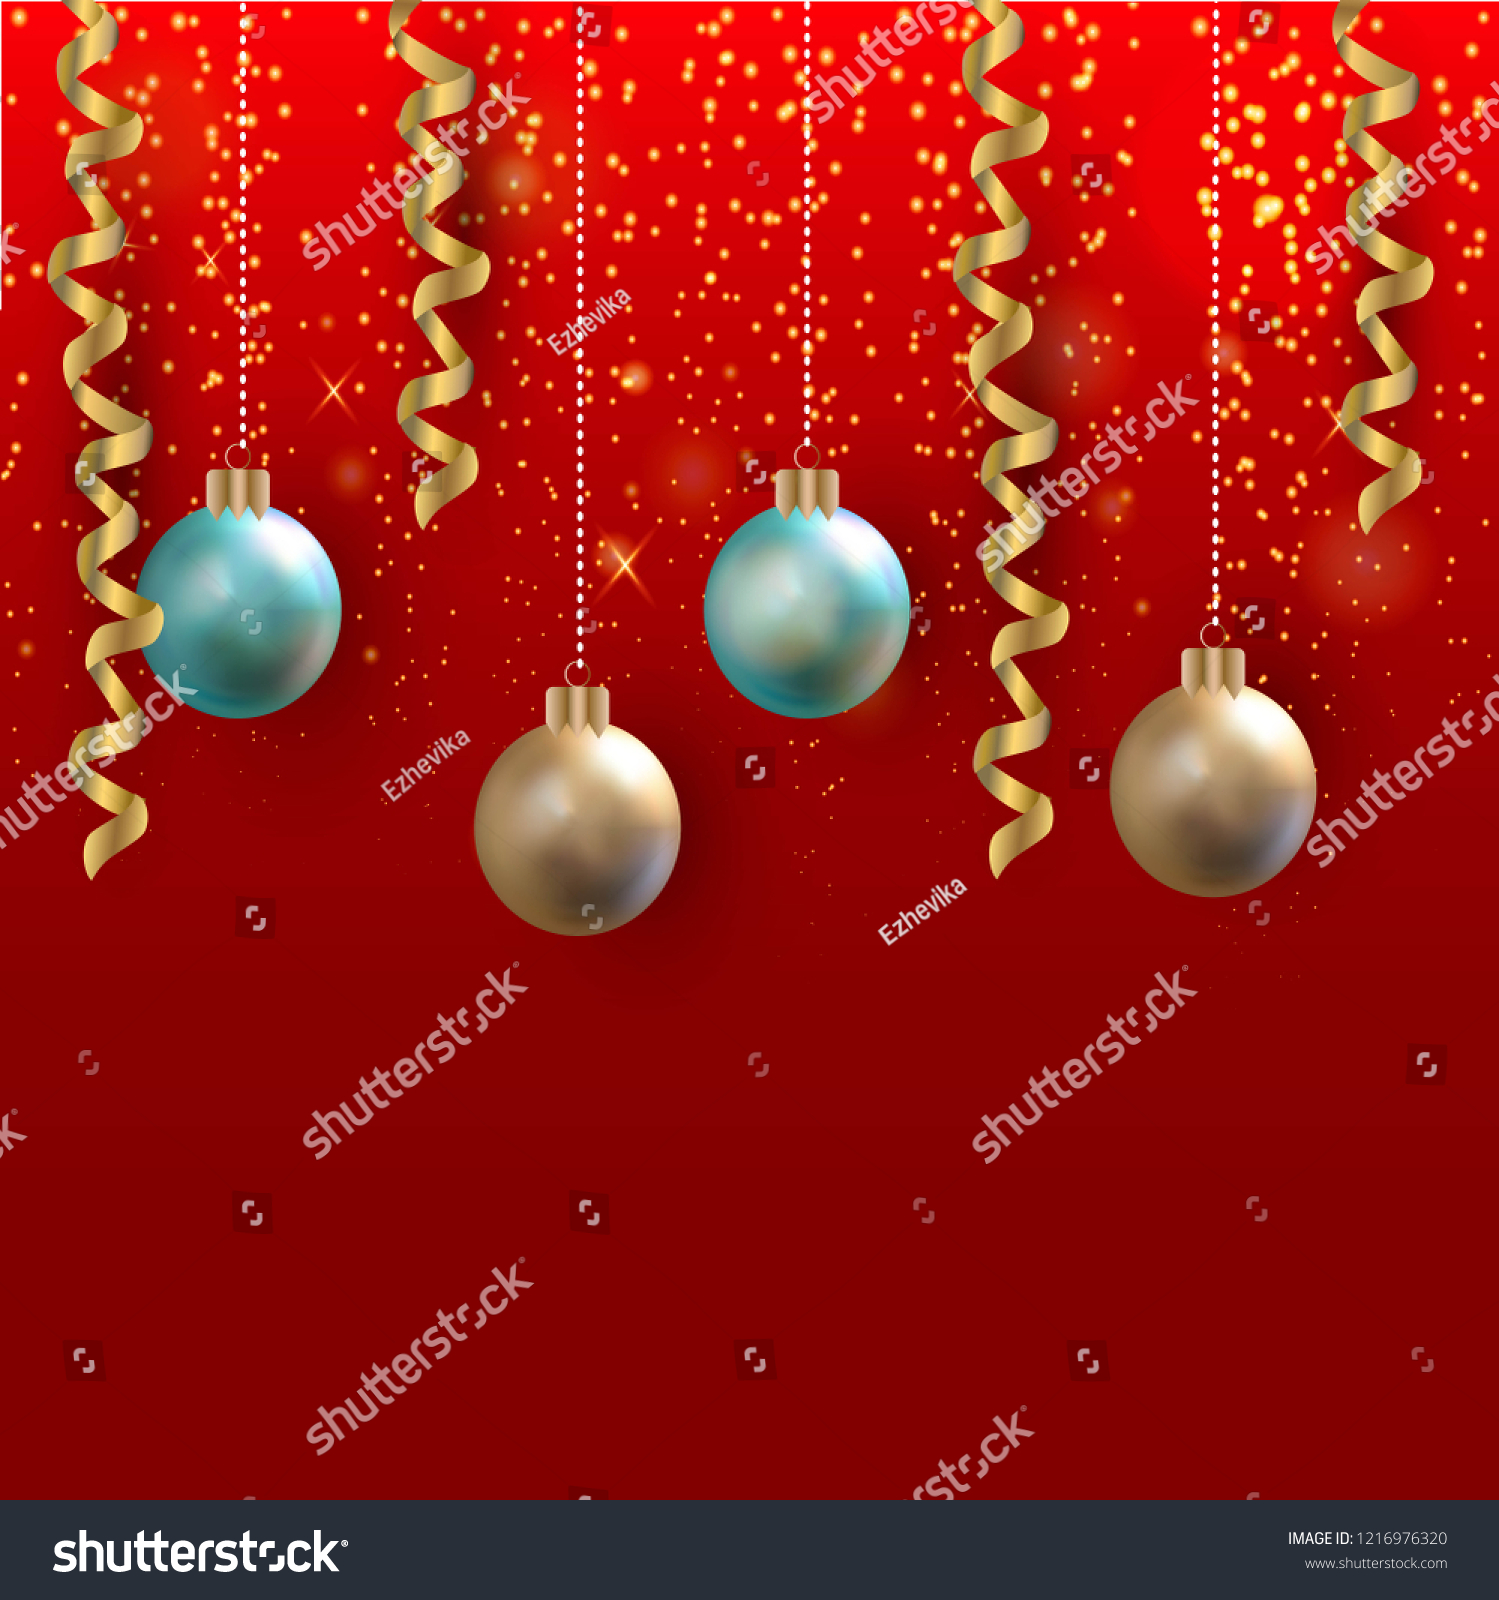 Christmas vector beautiful background. Sparkling background with glitter and a garland. Christmas balls and ribbons. #1216976320